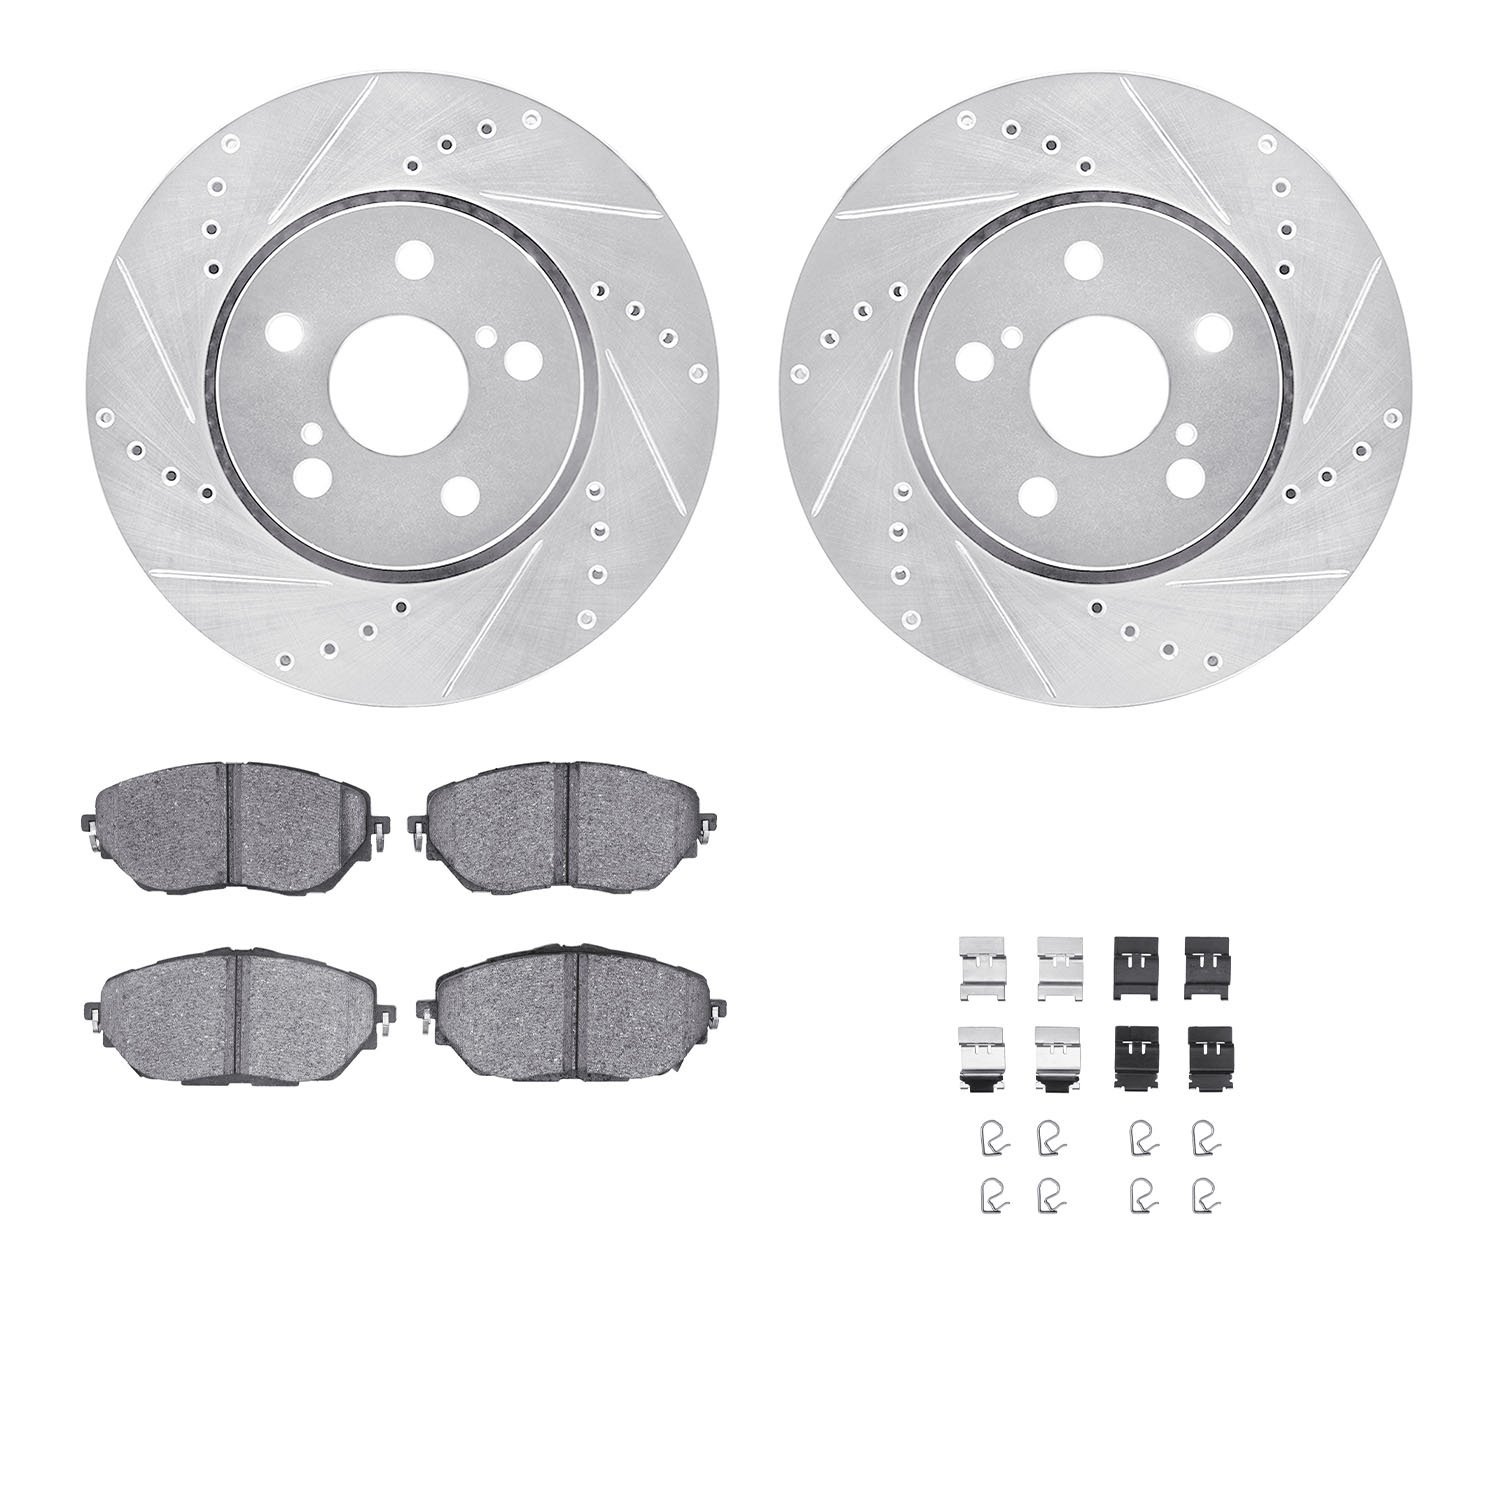 7312-76183 Drilled/Slotted Brake Rotor with 3000-Series Ceramic Brake Pads Kit & Hardware [Silver], Fits Select Lexus/Toyota/Sci